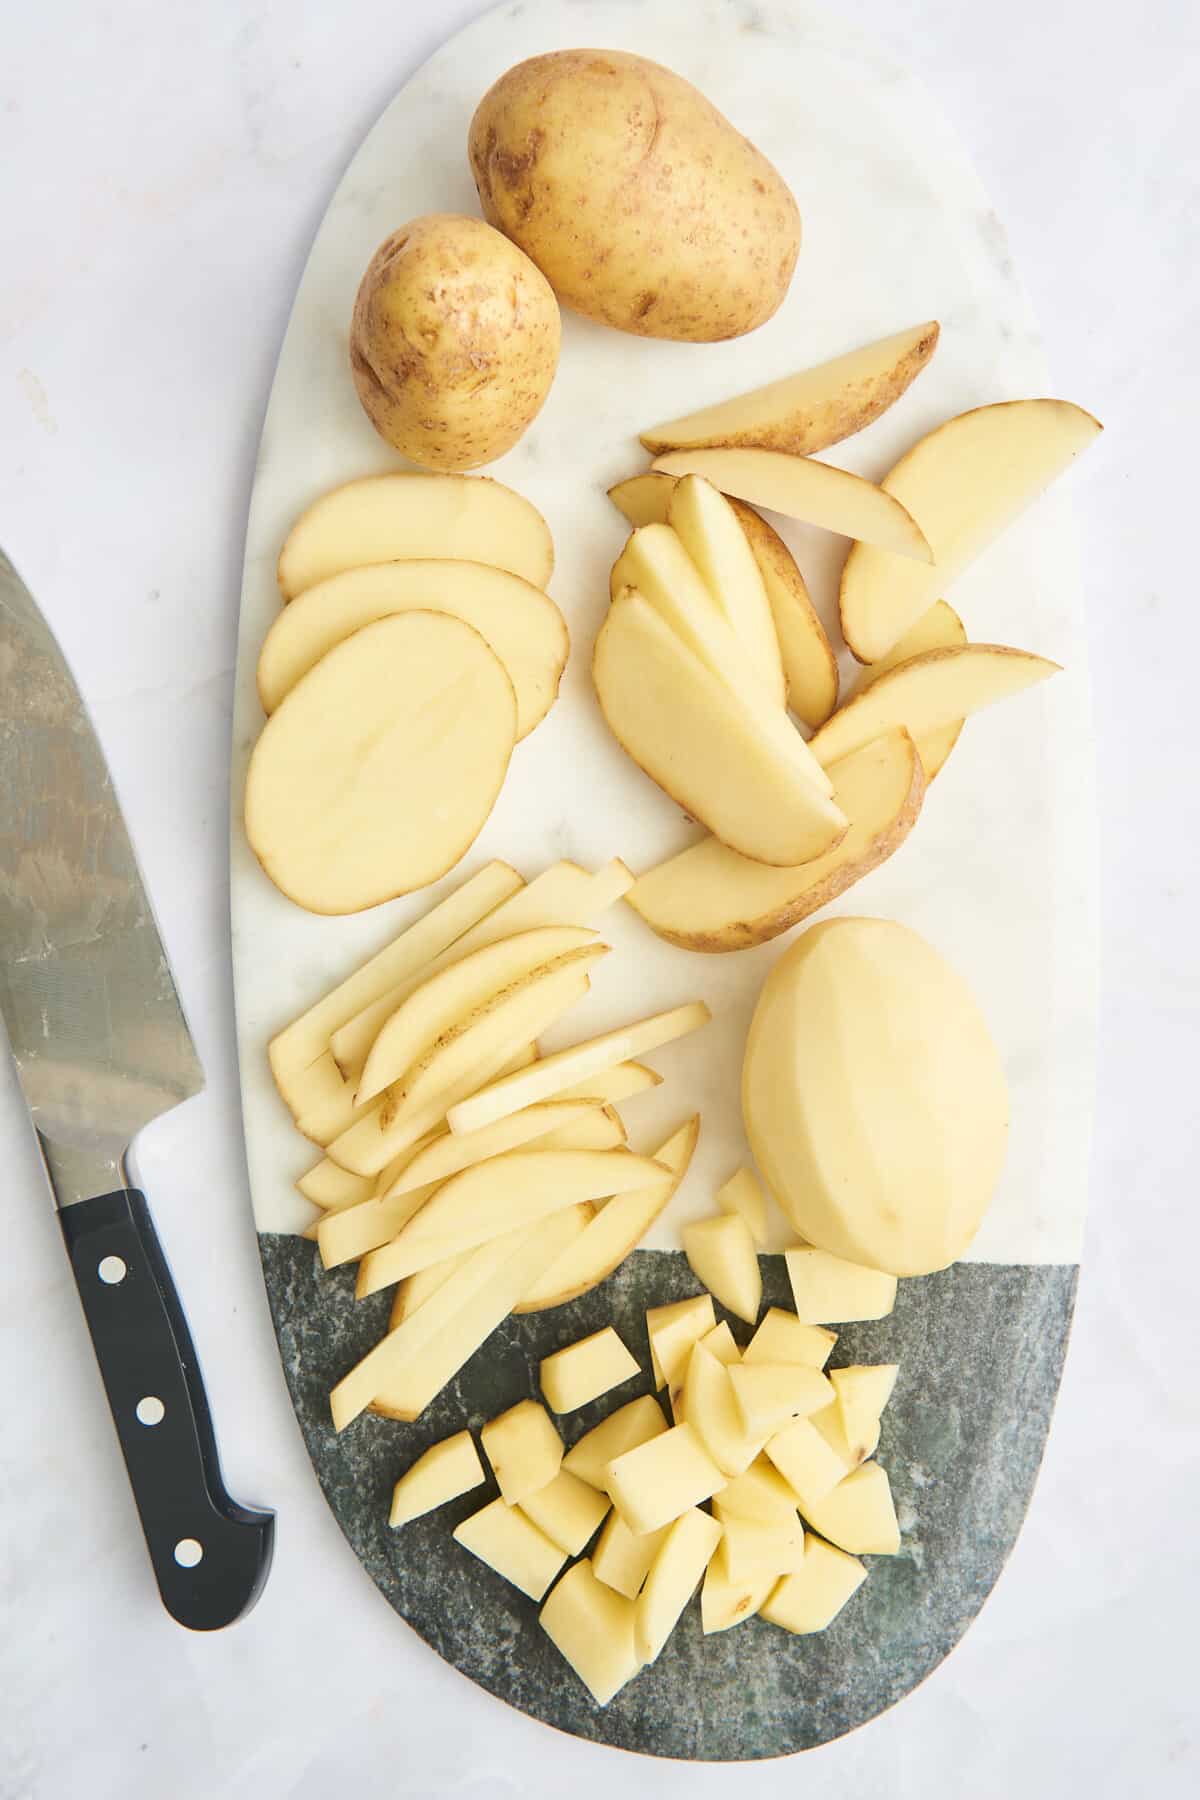 Whole potatoes, peeled potatoes, potato slices, wedges, fries, and cubes on a cutting board. 